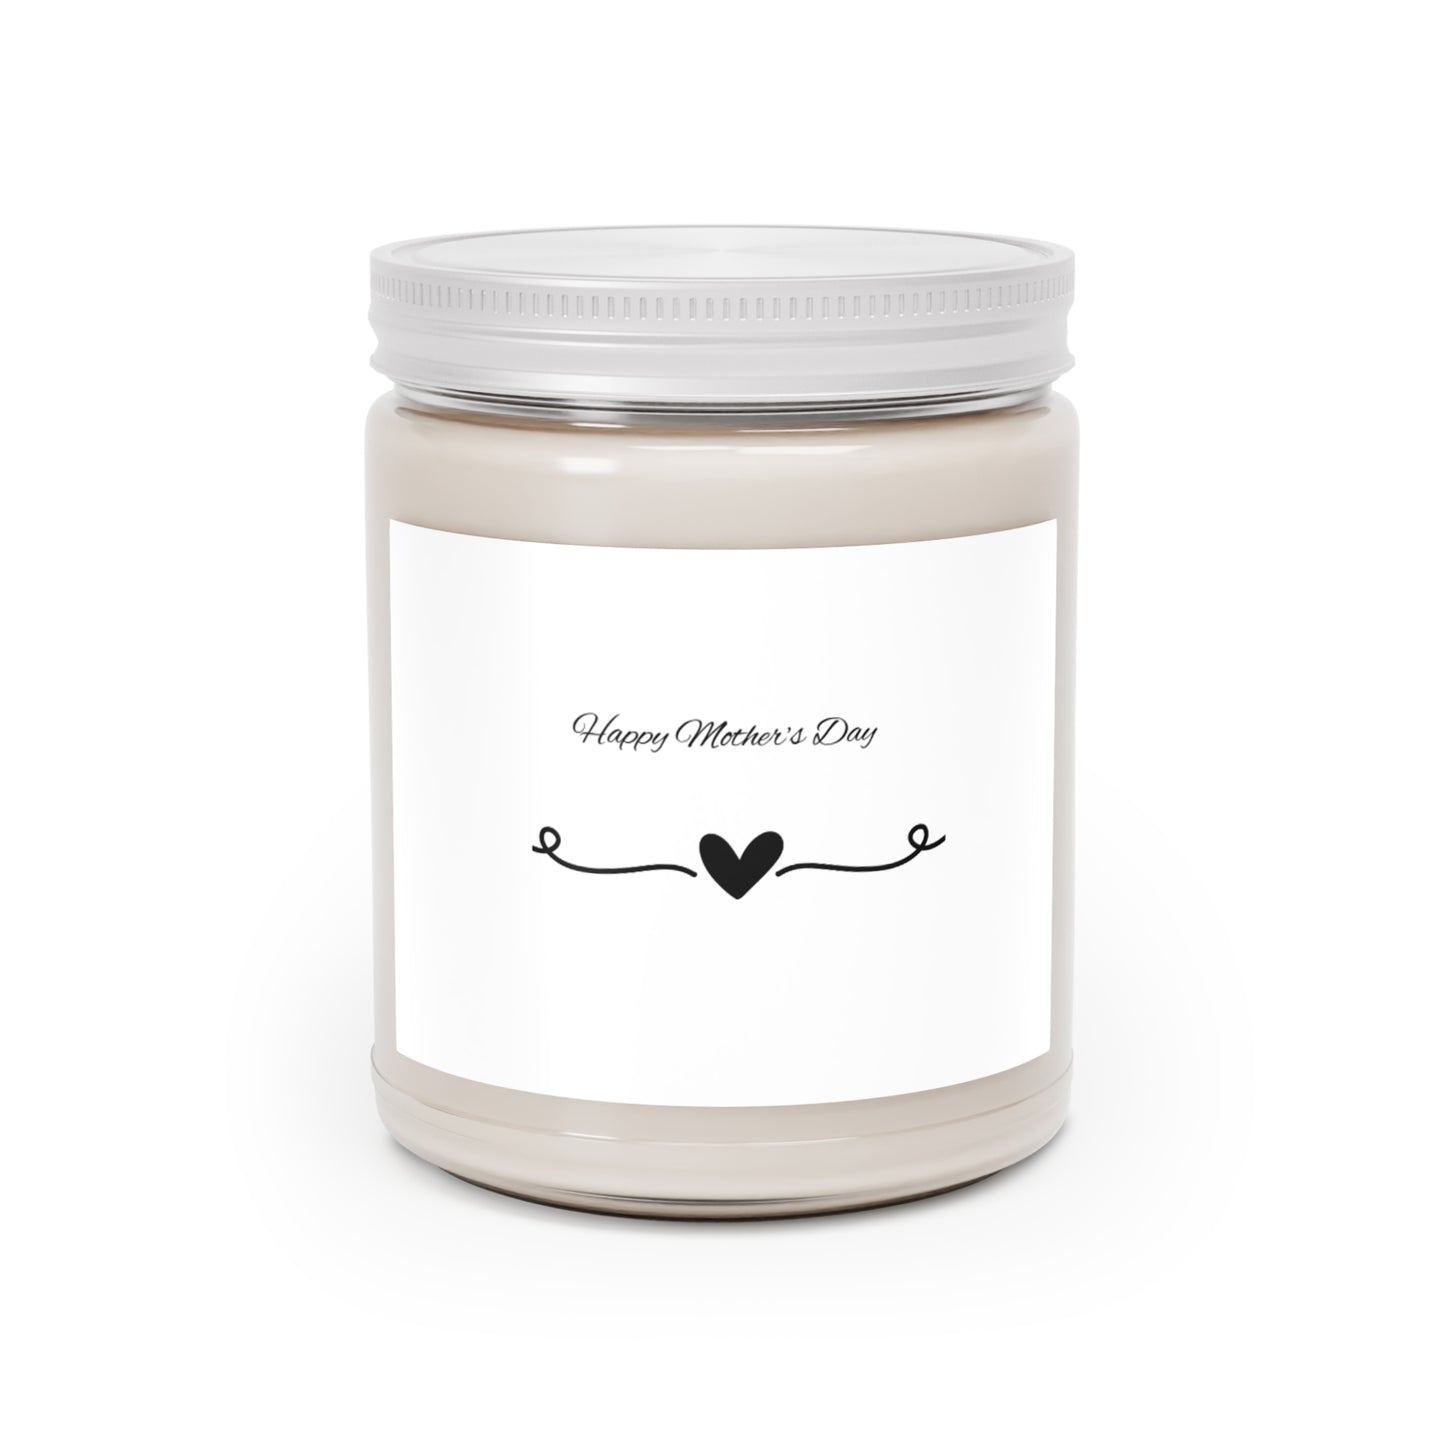 Happy Mother's Day Scented Candles, 9oz